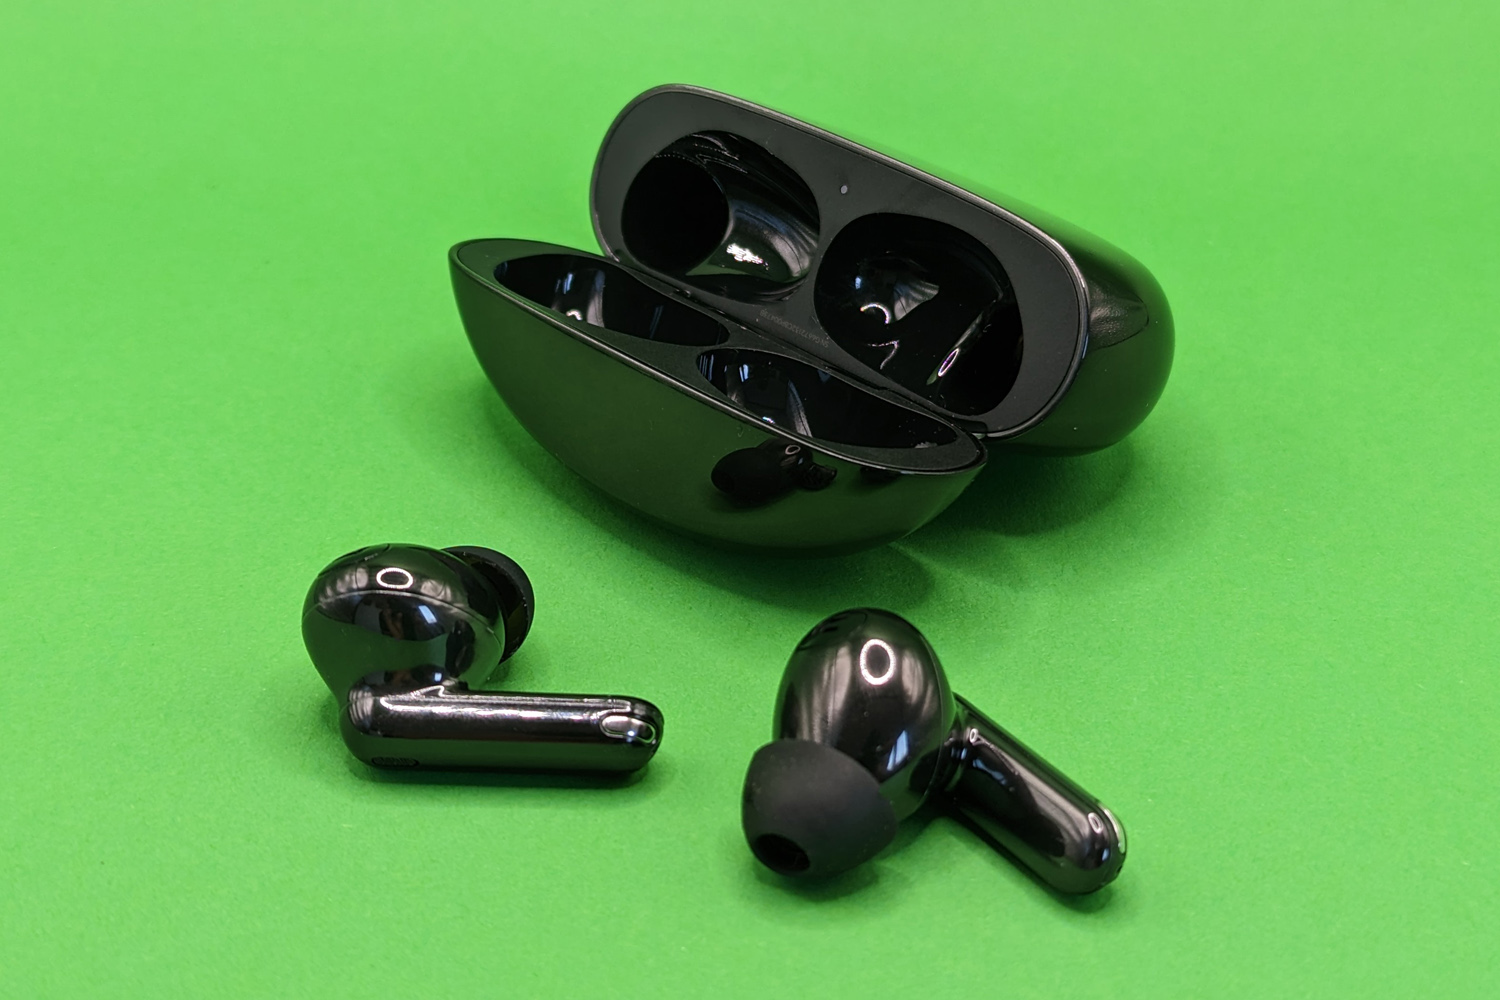 OPPO Enco X2 Earbuds: 10 Pointer review- Premium look and great sound –  India TV